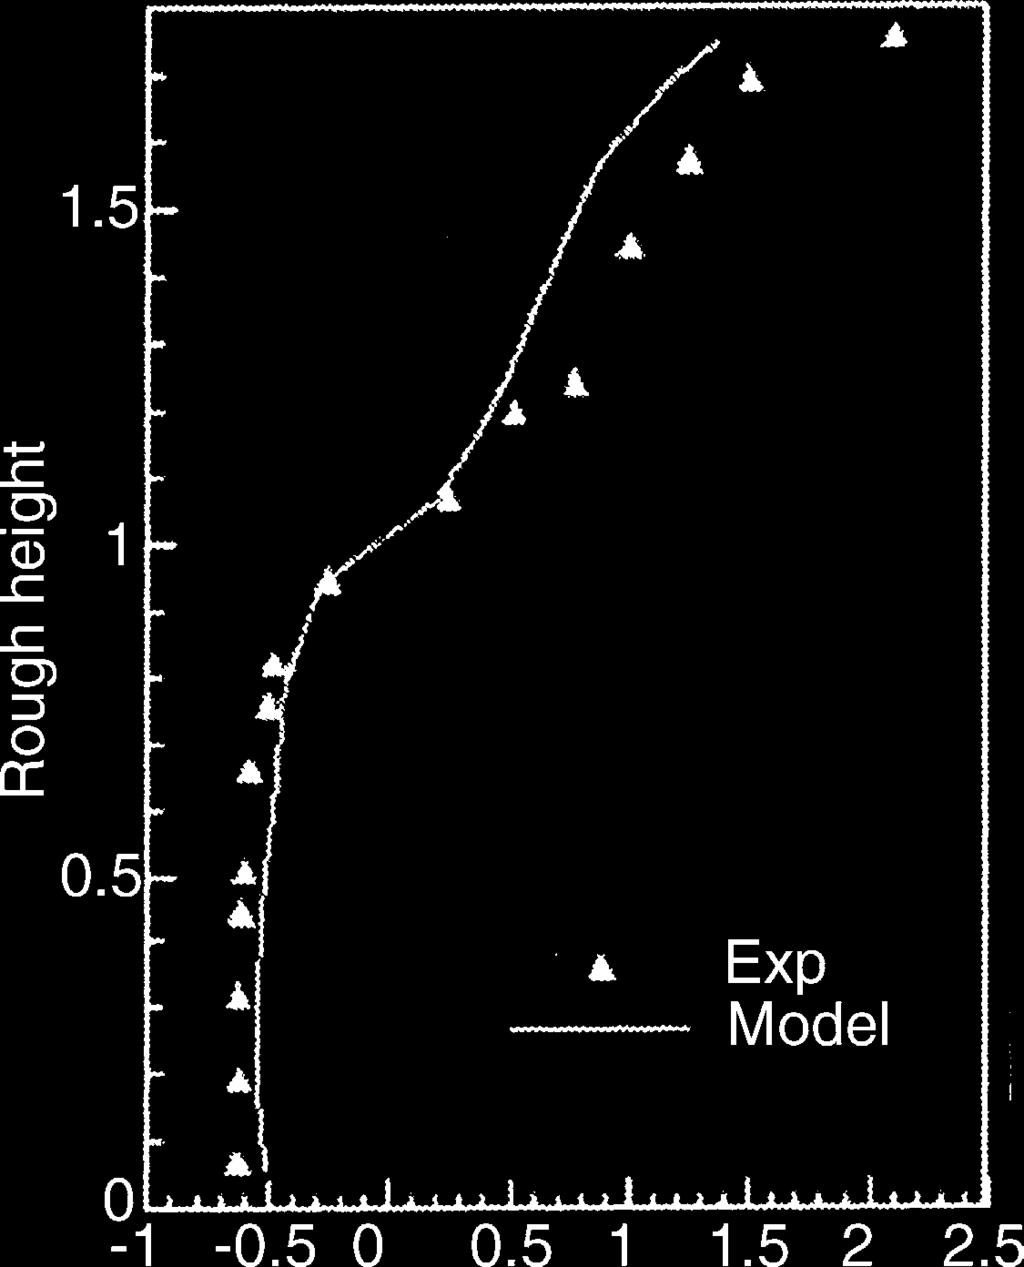 N.L. Ryder et al. / Journal of Hazardous Materials 115 (2004) 149 154 151 Fig. 2. Doorway velocity. Fig. 4. Temperature profile: effect of wind on fire and target.